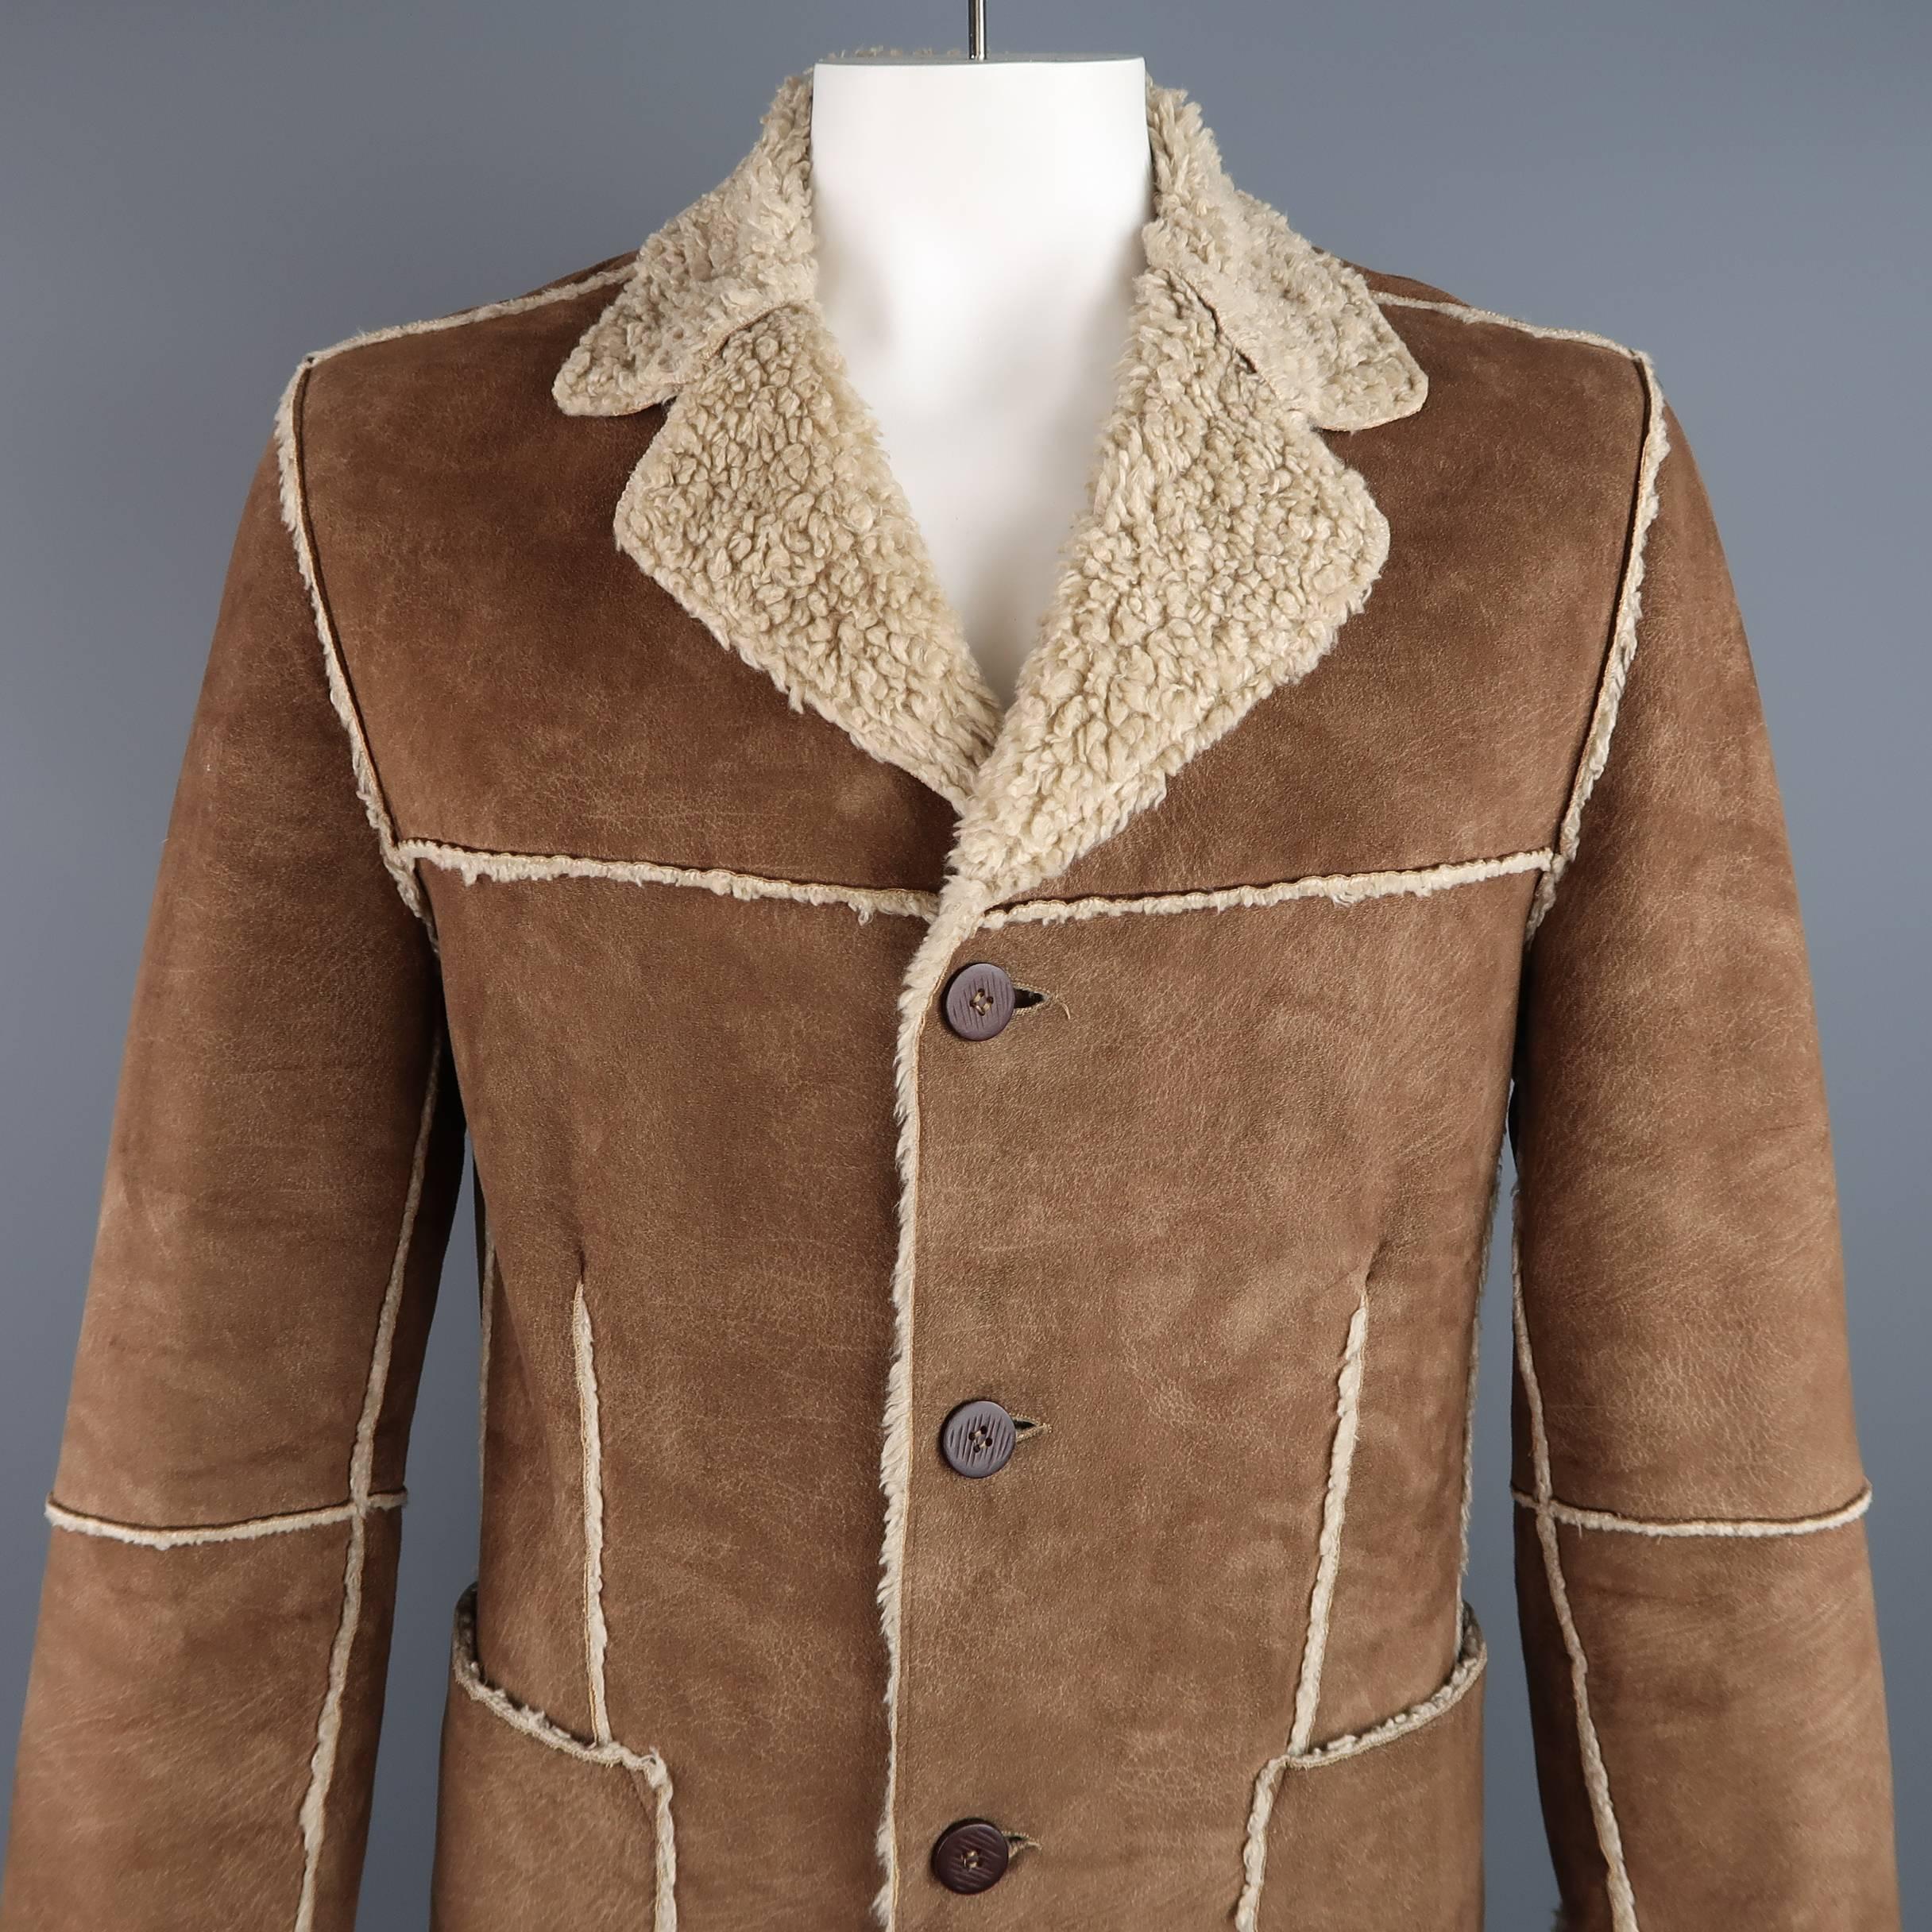 PRIMO EMPORIO coat comes in a light weight, tan faux vegan shearling and features a notch lapel, four button closure, patch pockets, and external reverse seams throughout. Made in Italy.
 
Good Pre-Owned Condition.
Marked: (no size)
 
Measurements:
